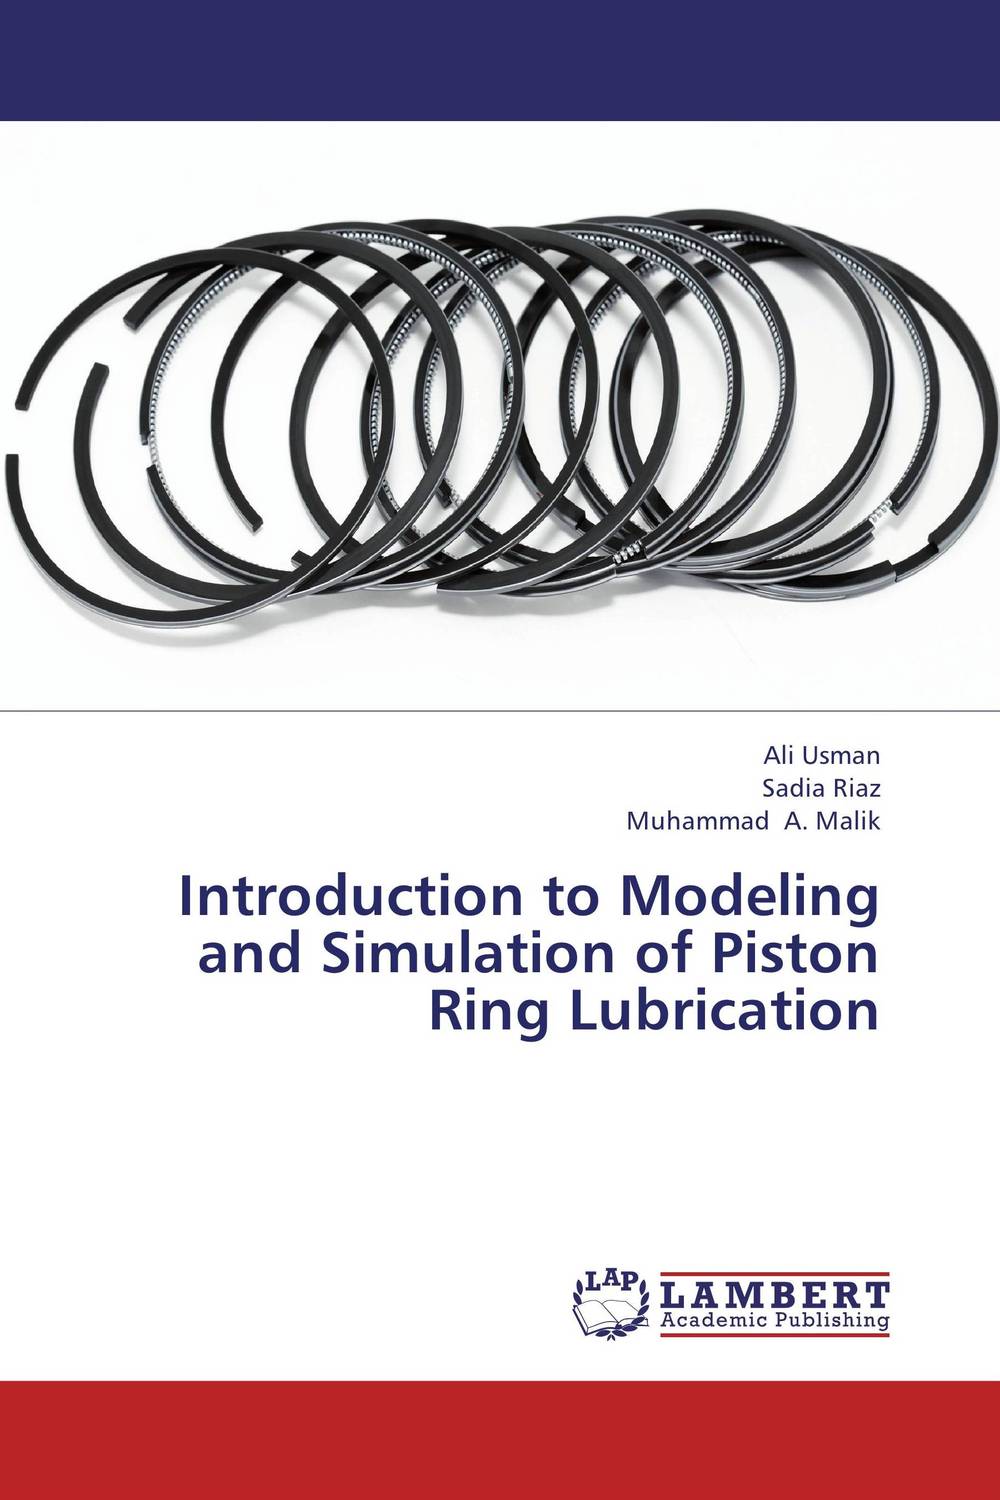 Introduction to Modeling and Simulation of Piston Ring Lubrication